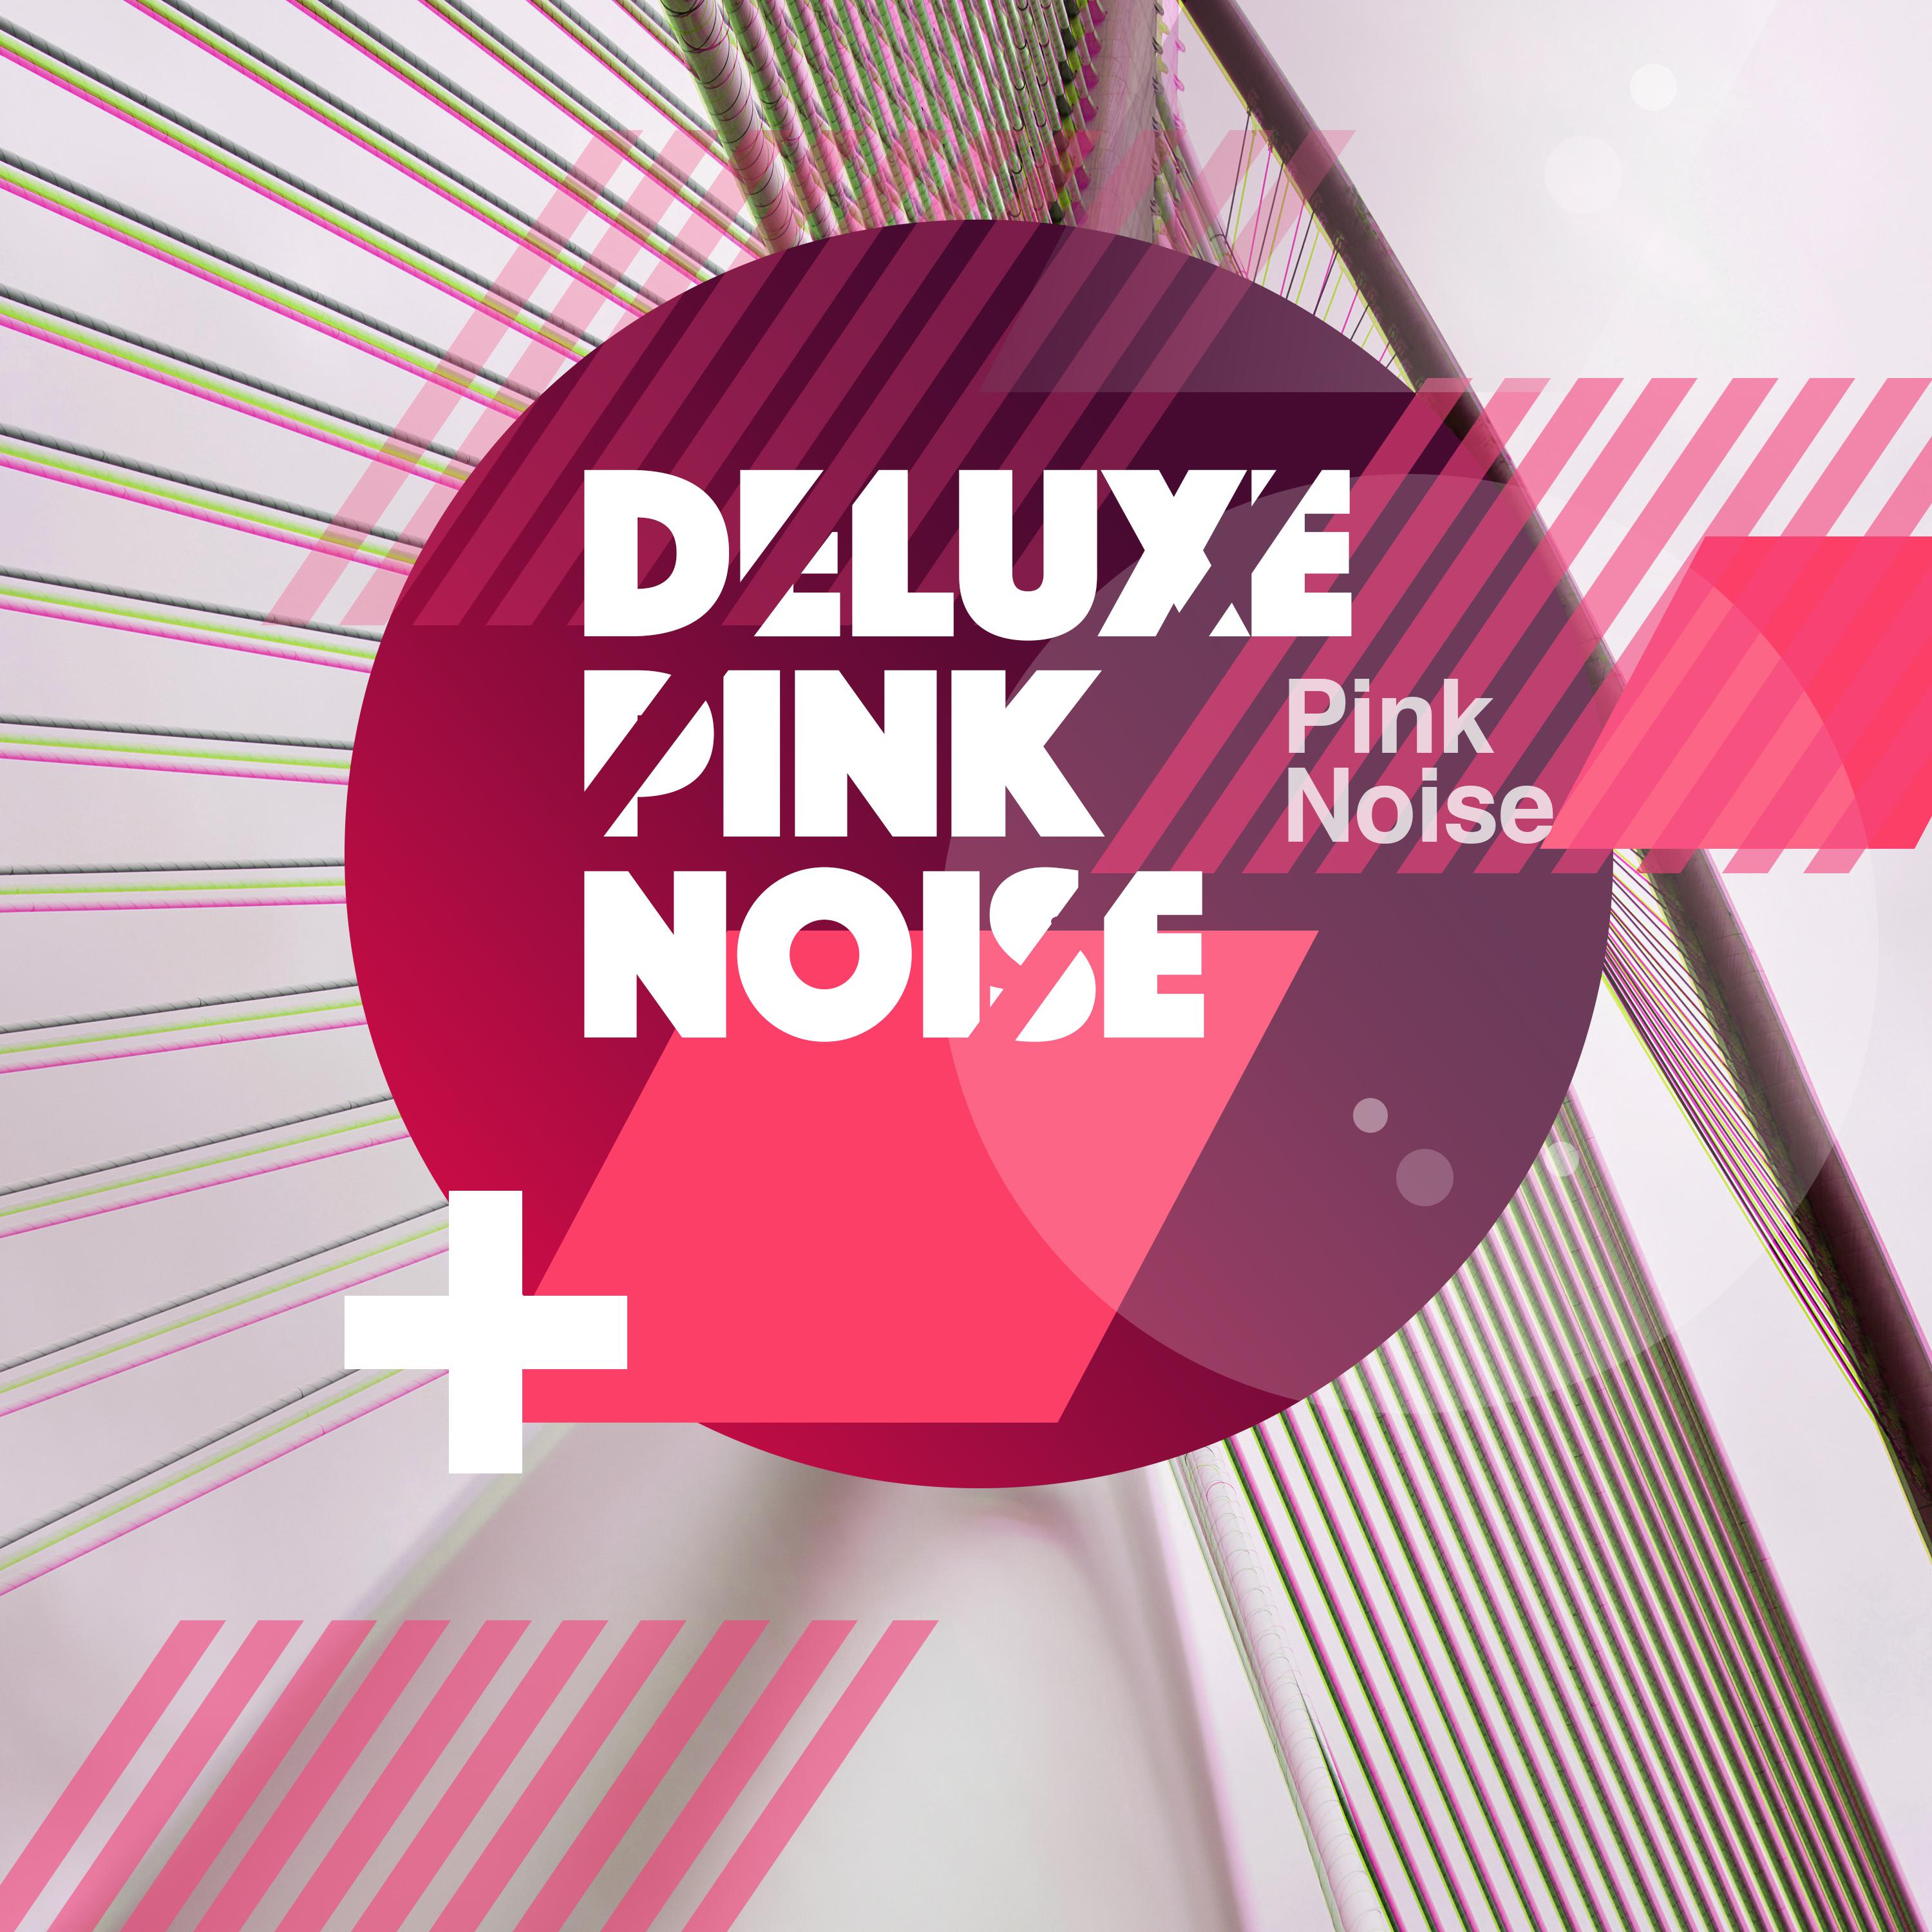 Deluxe Pink Noise